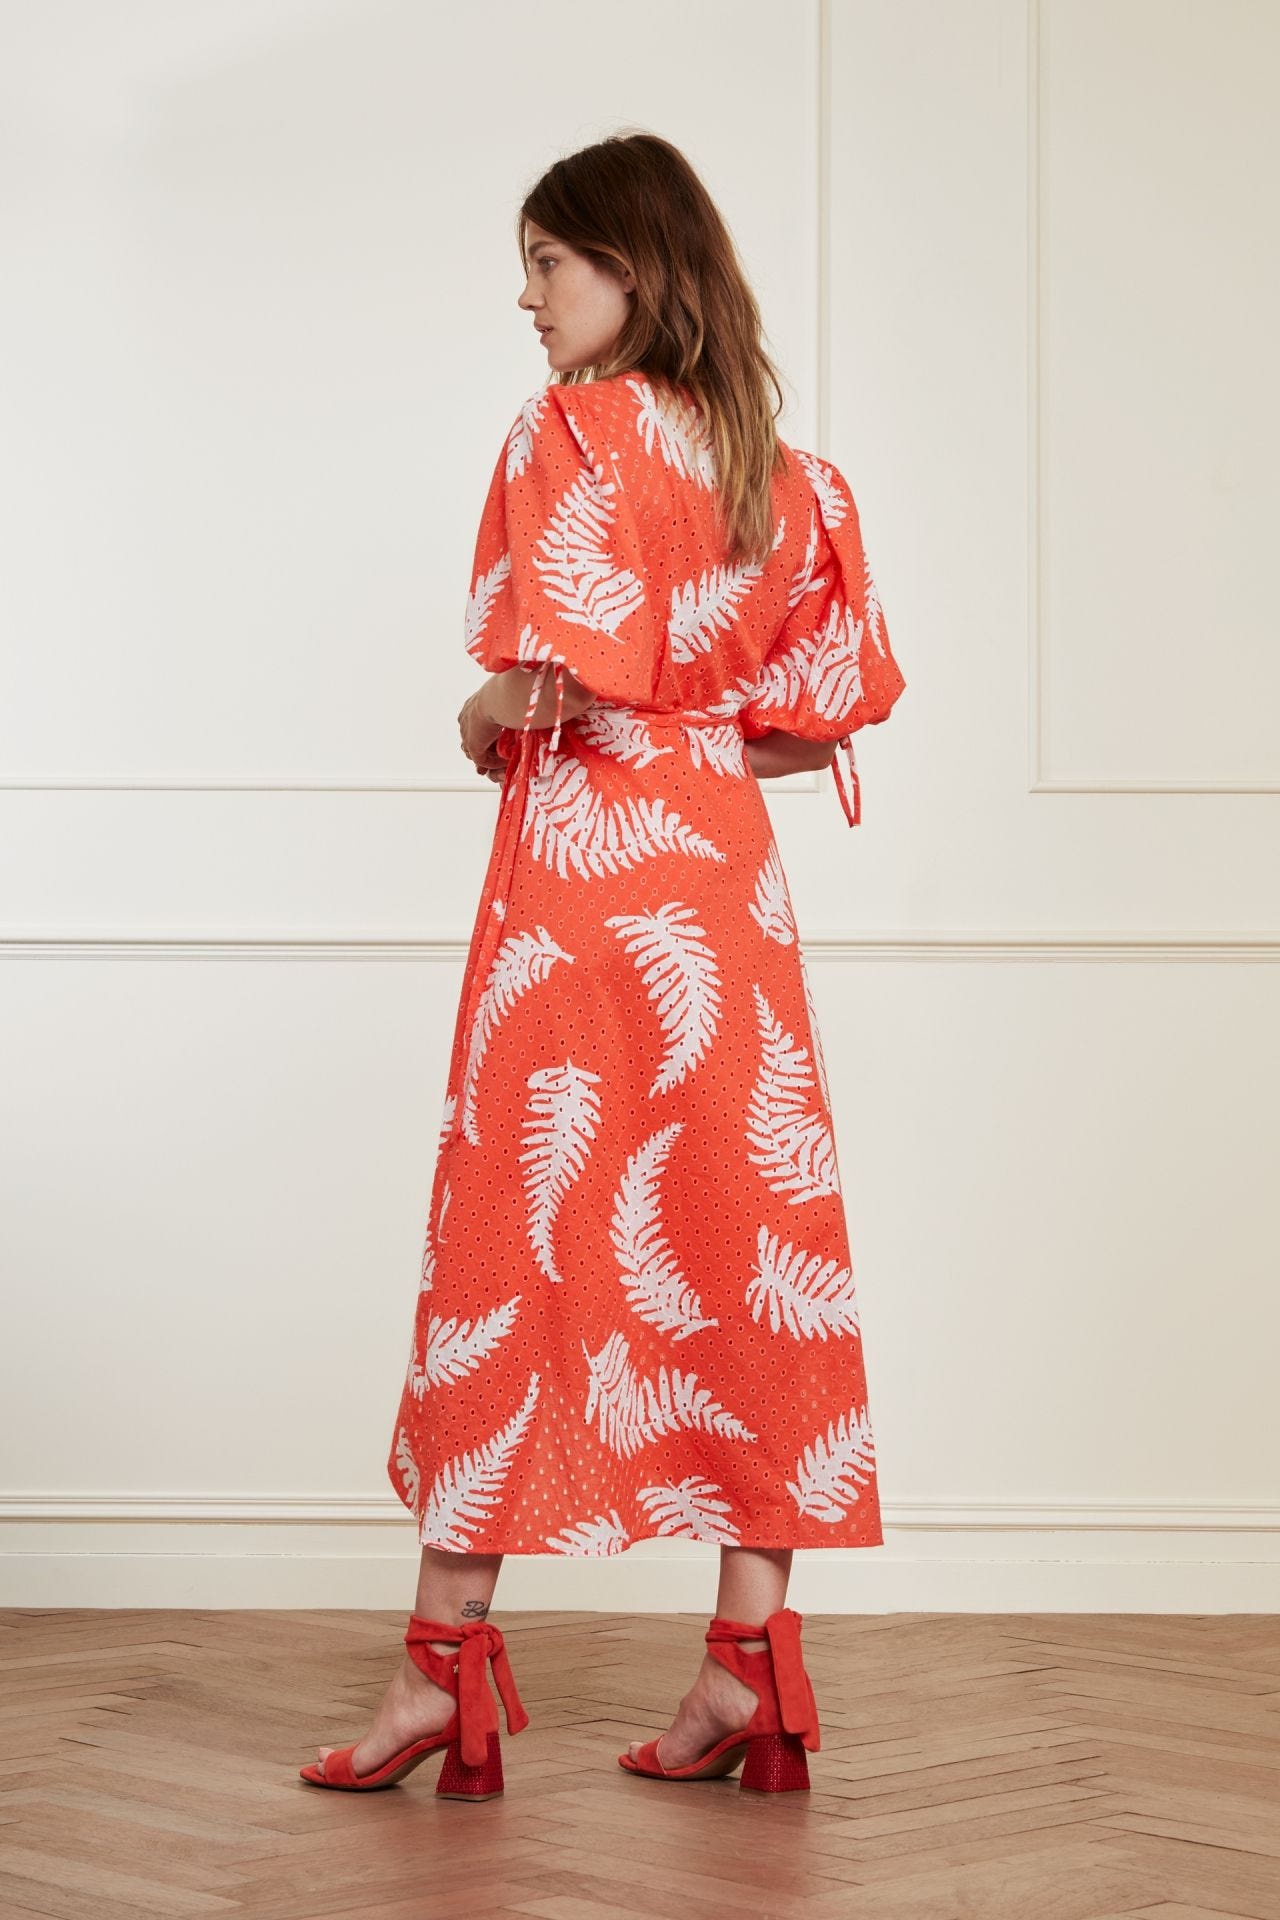 The back view of a woman in a Fabienne Chapot Charlie Broderie Dress - Hot Coral feminine wrap dress.